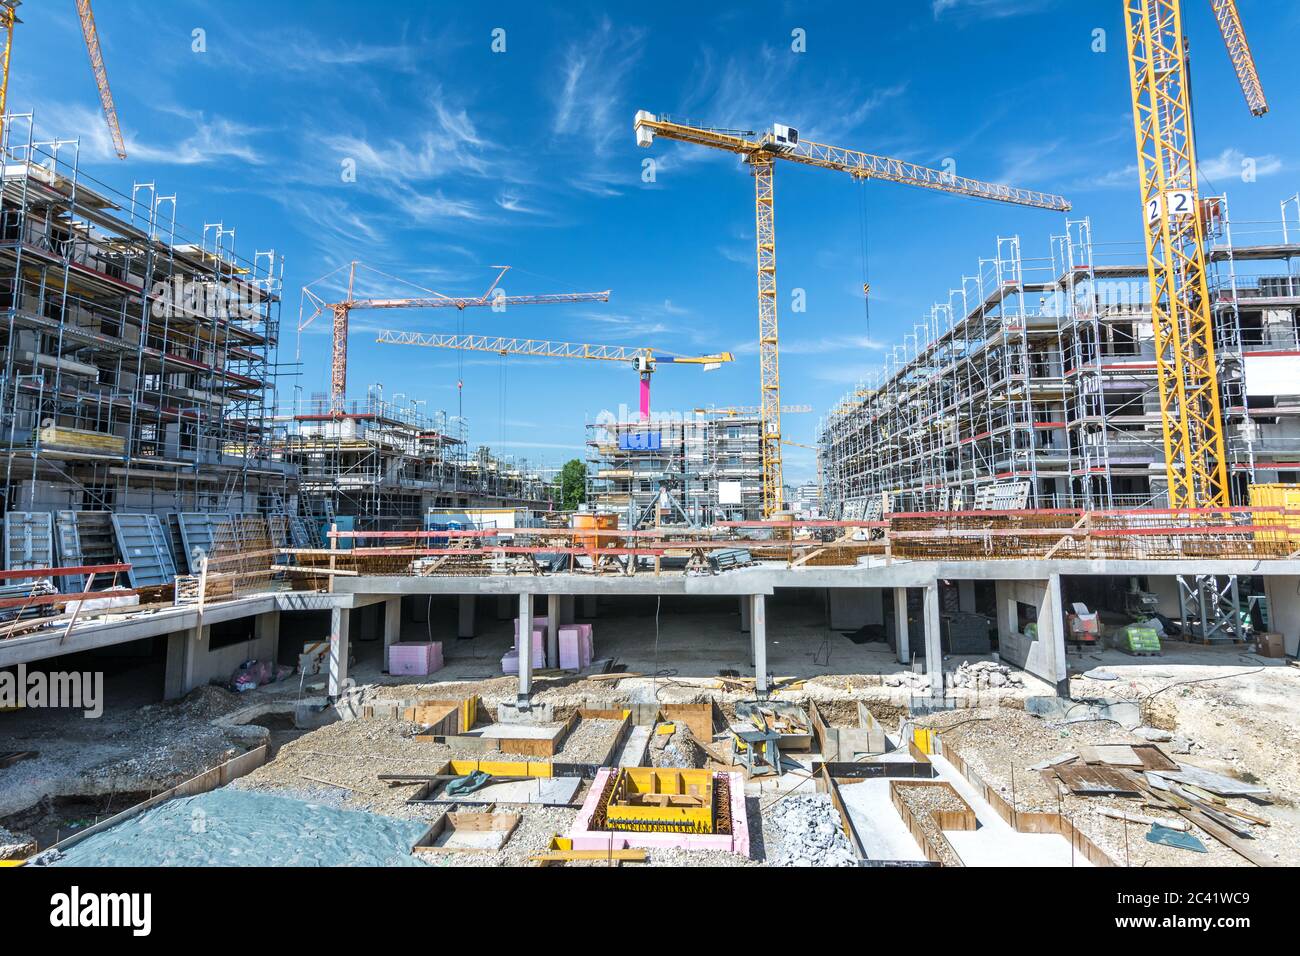 Large construction site with foundations, unfinished buildings and cranes Stock Photo